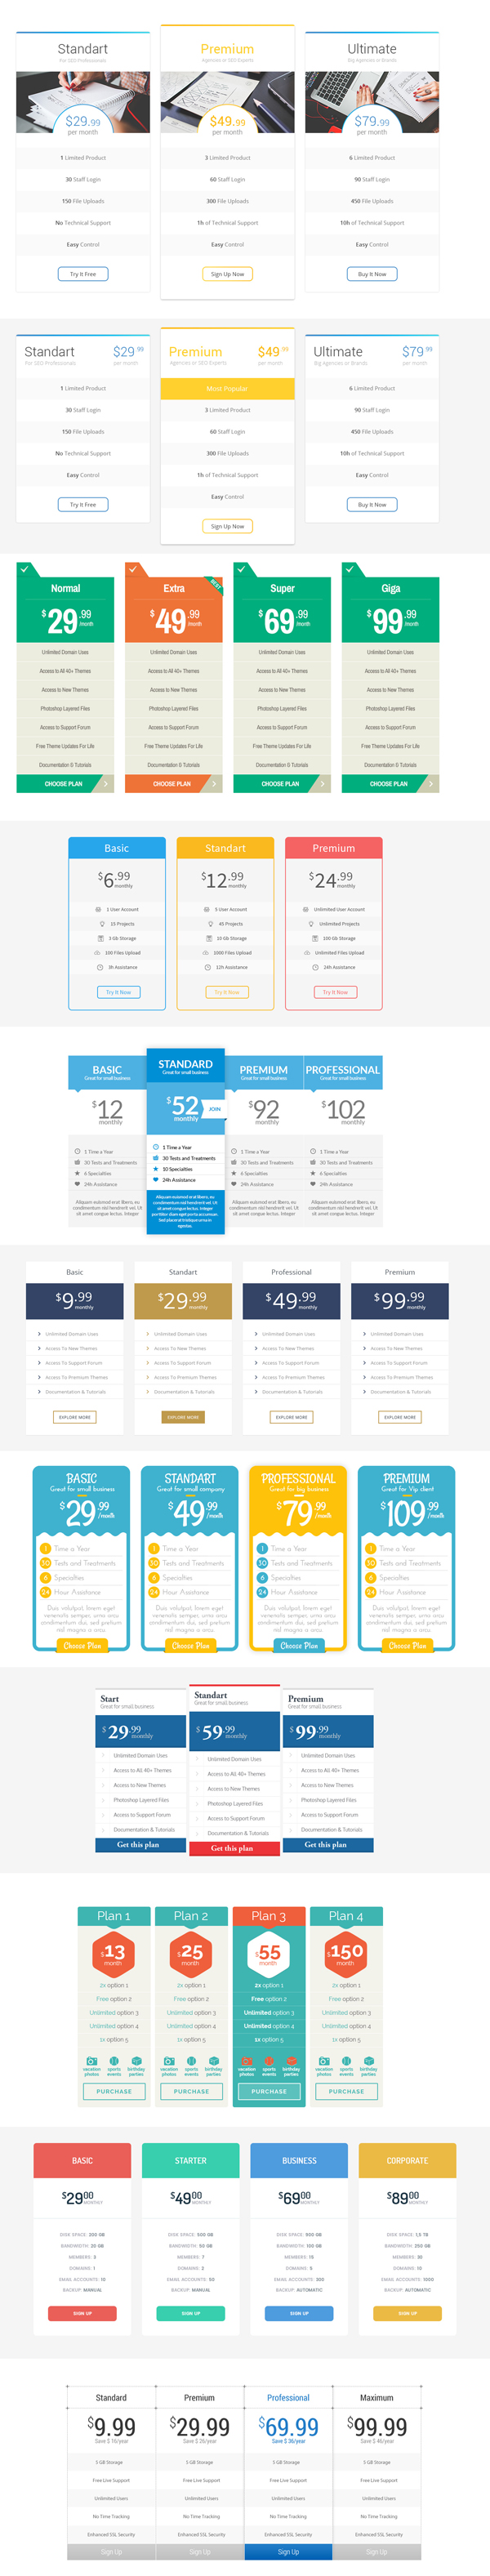 Free Pricing Tables 12 Designs PSD Template